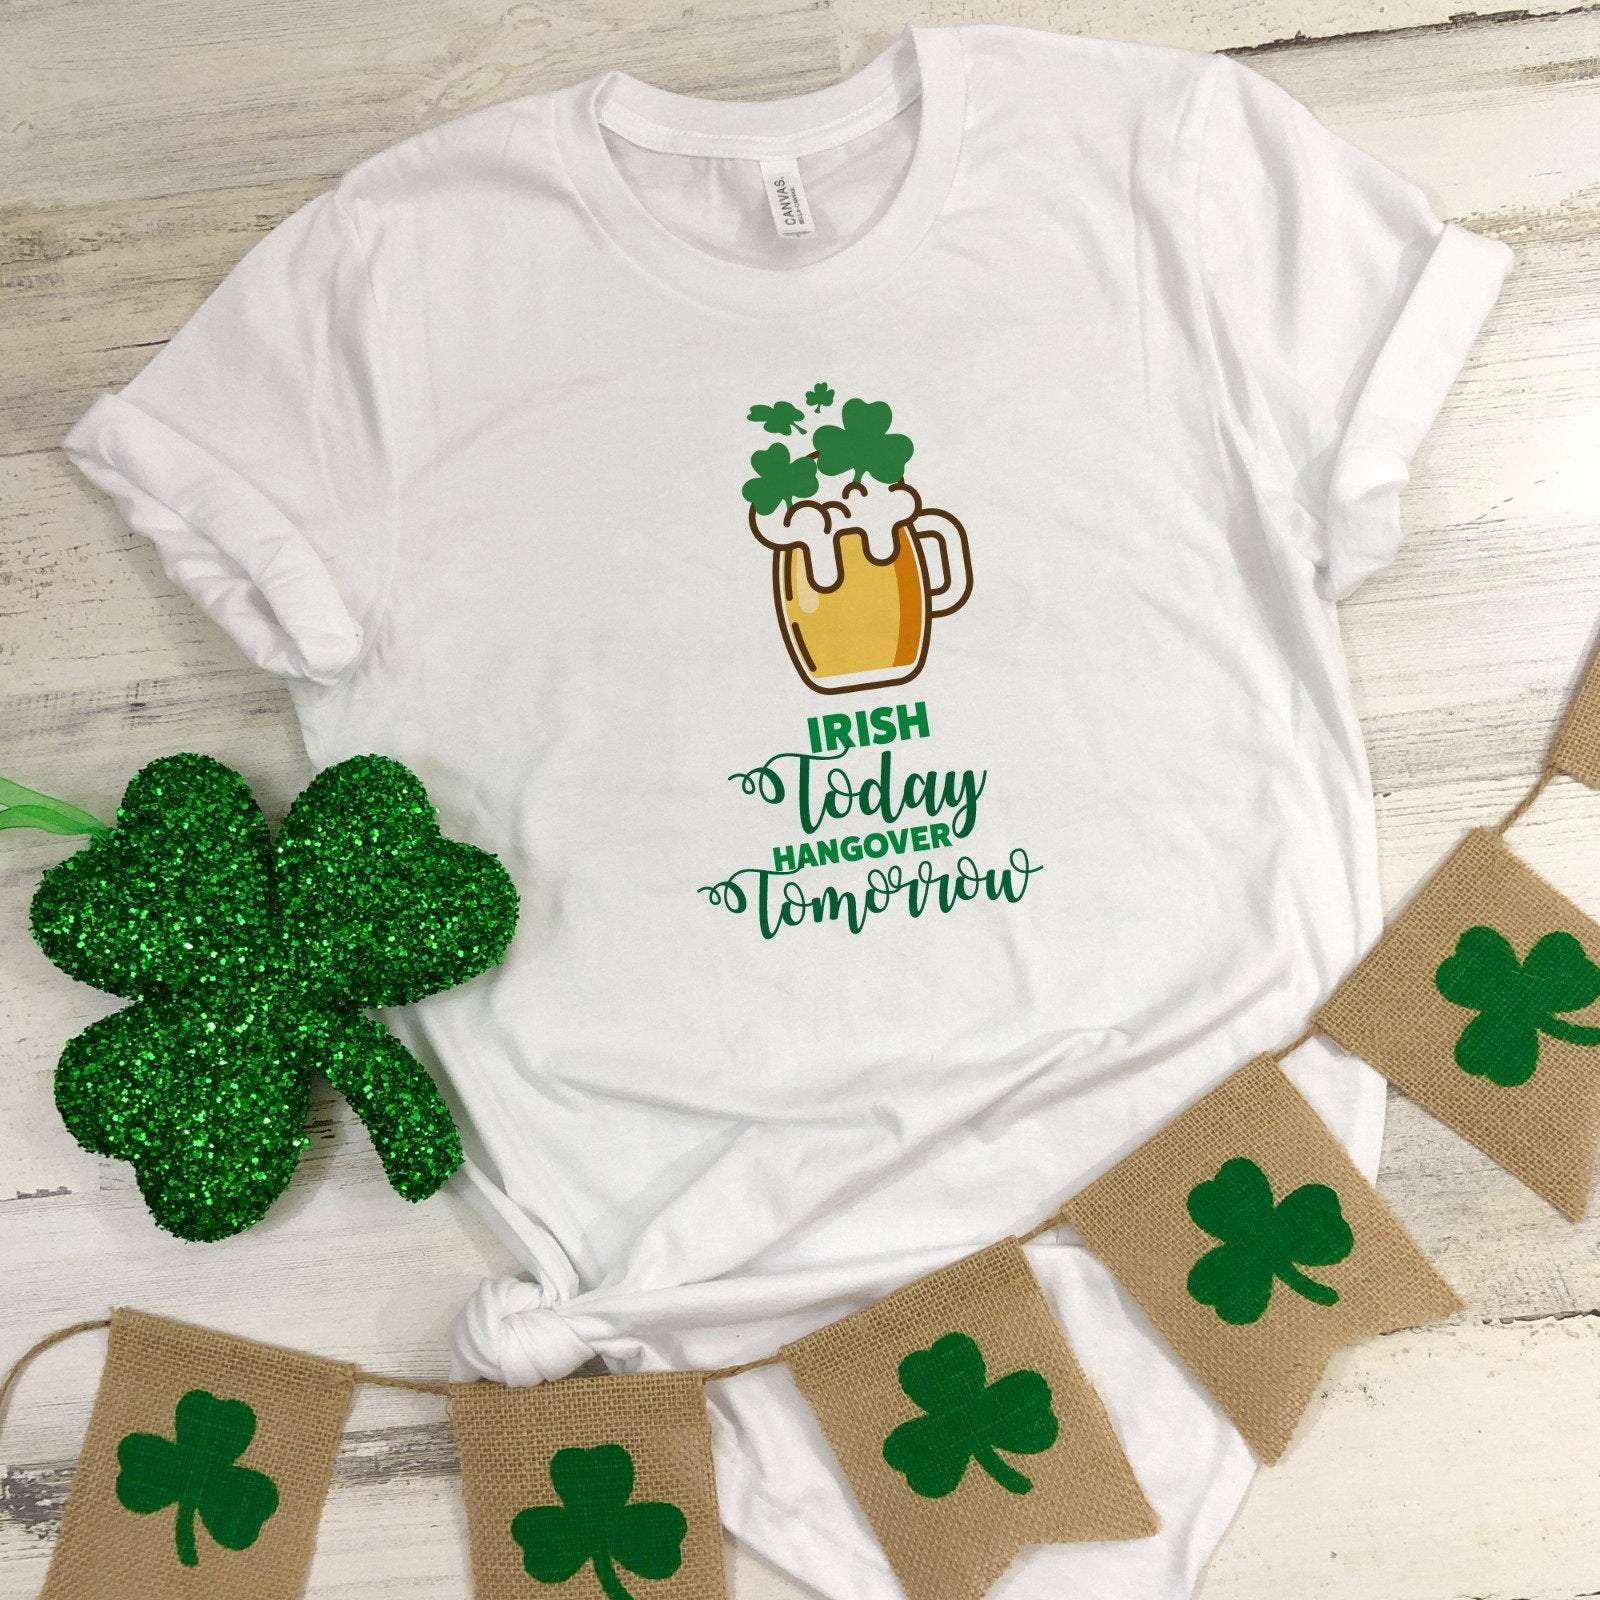 Irish today Hangover tomorrow T-shirt, Funny St Patricks Day tee with beer glass